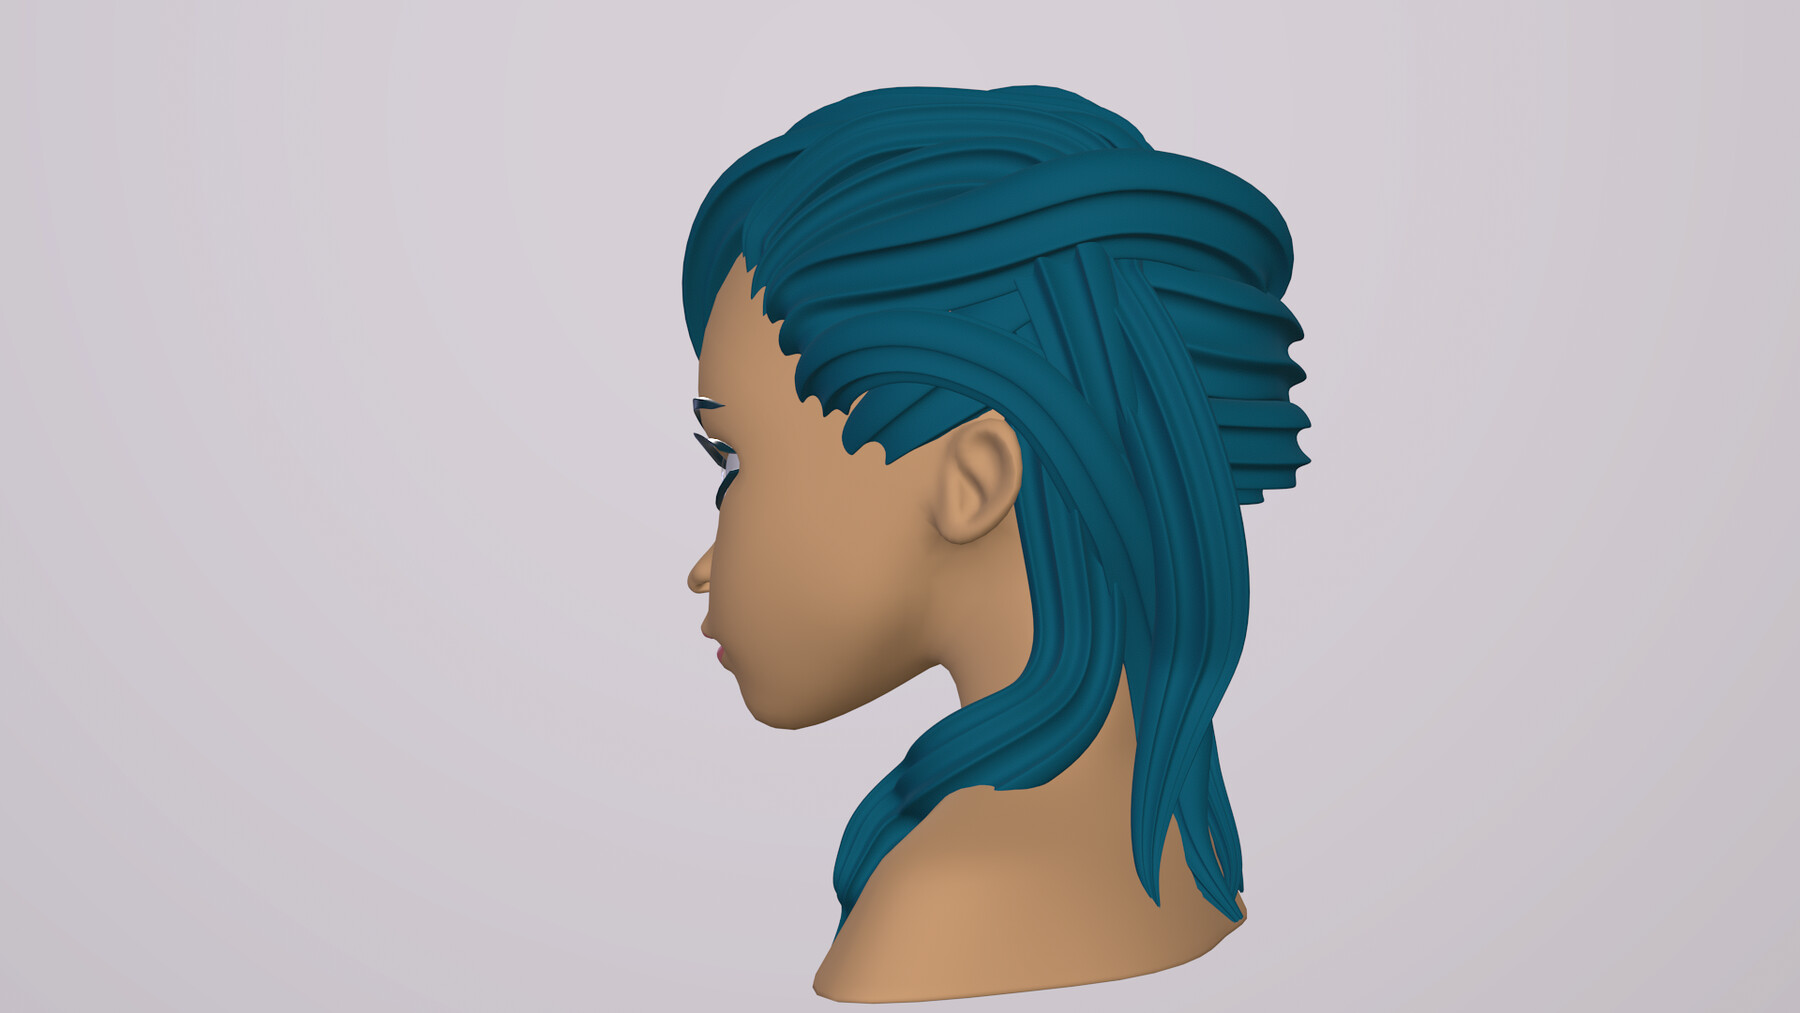 ArtStation - Female Head Stylized Base mesh with Hair in blender curve 3 |  Game Assets